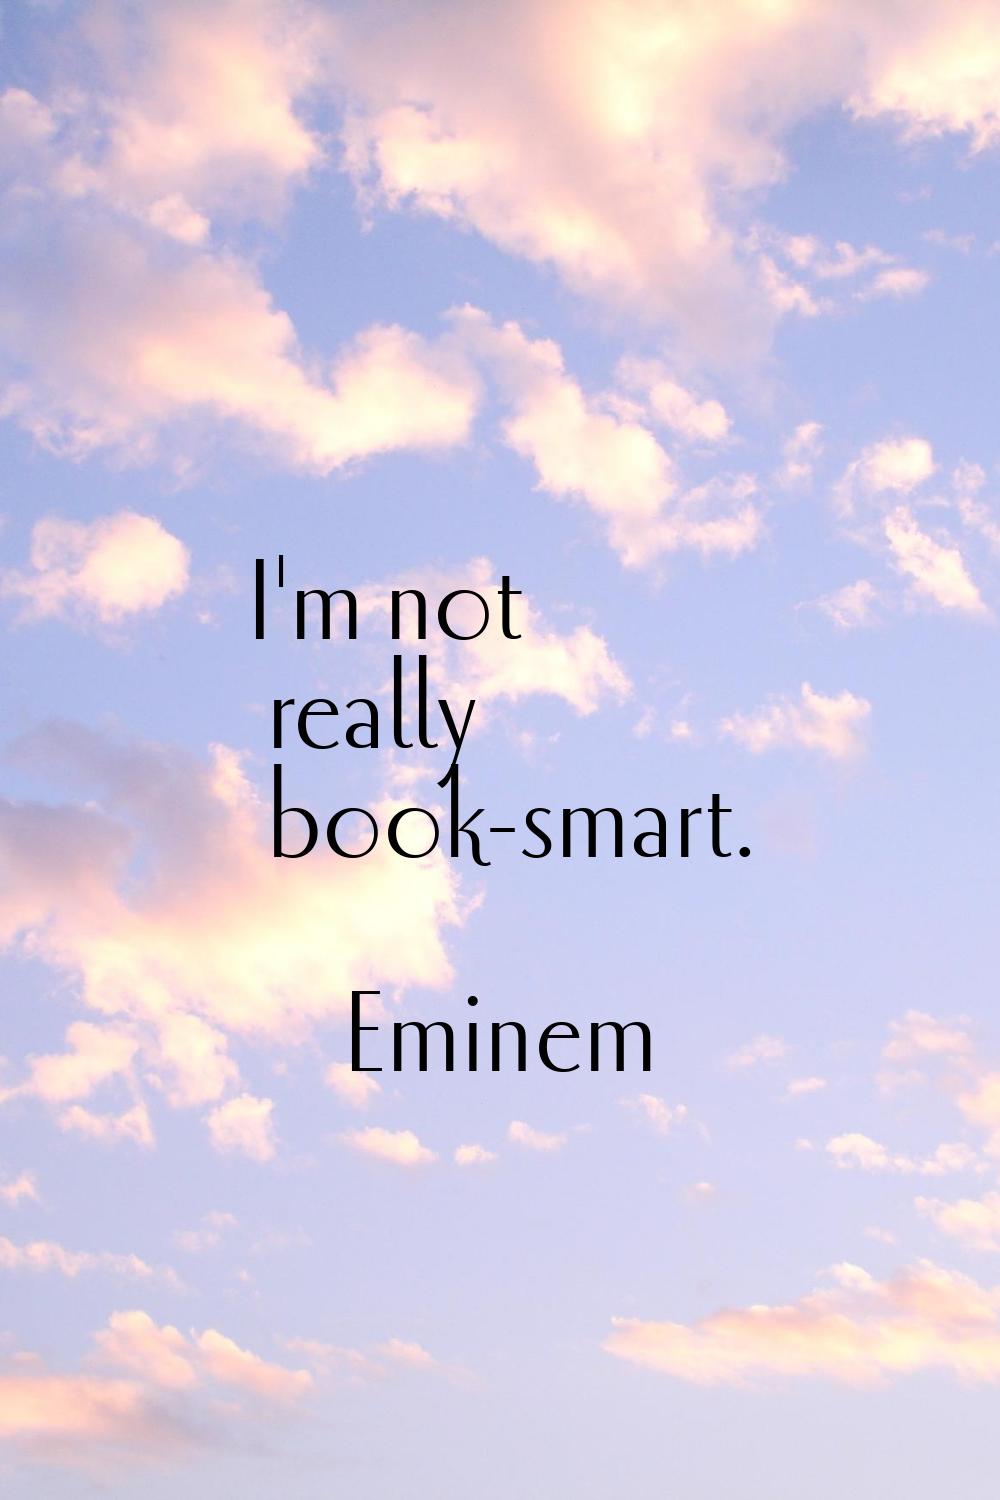 I'm not really book-smart.